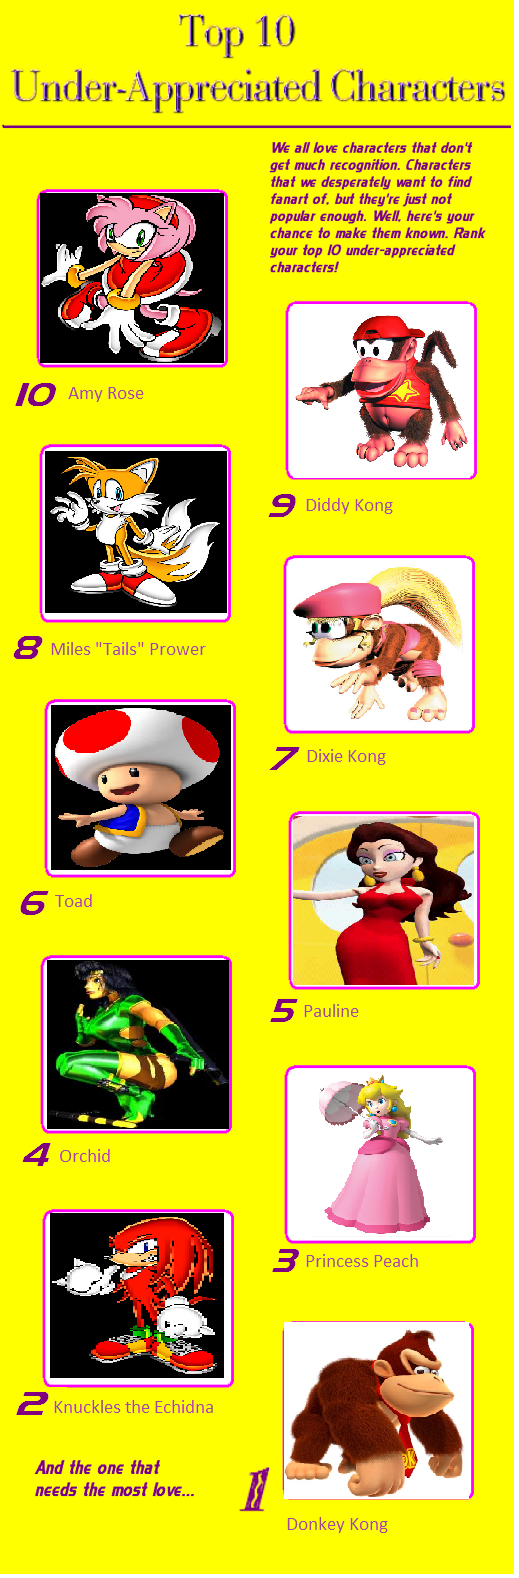 Top 4 cutest Mario characters by TLHandGFFanatic64203 on DeviantArt